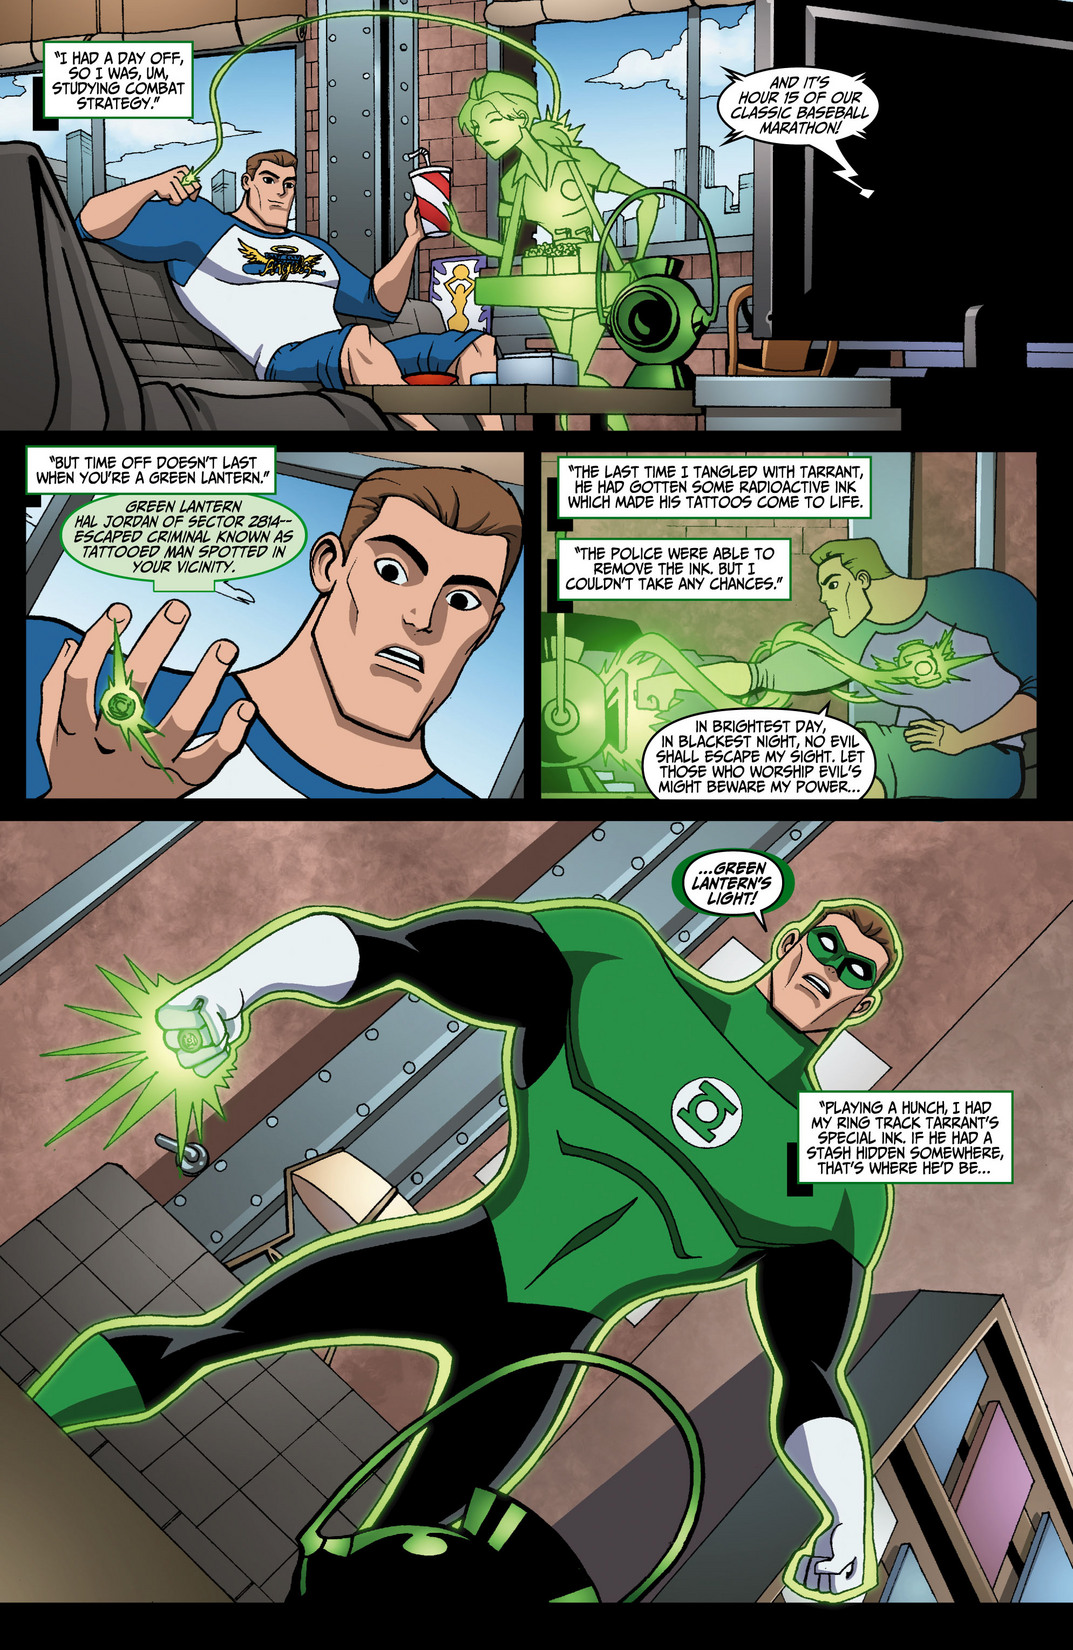 Green Lantern The Animated Series Issue 4 | Read Green Lantern The Animated  Series Issue 4 comic online in high quality. Read Full Comic online for  free - Read comics online in